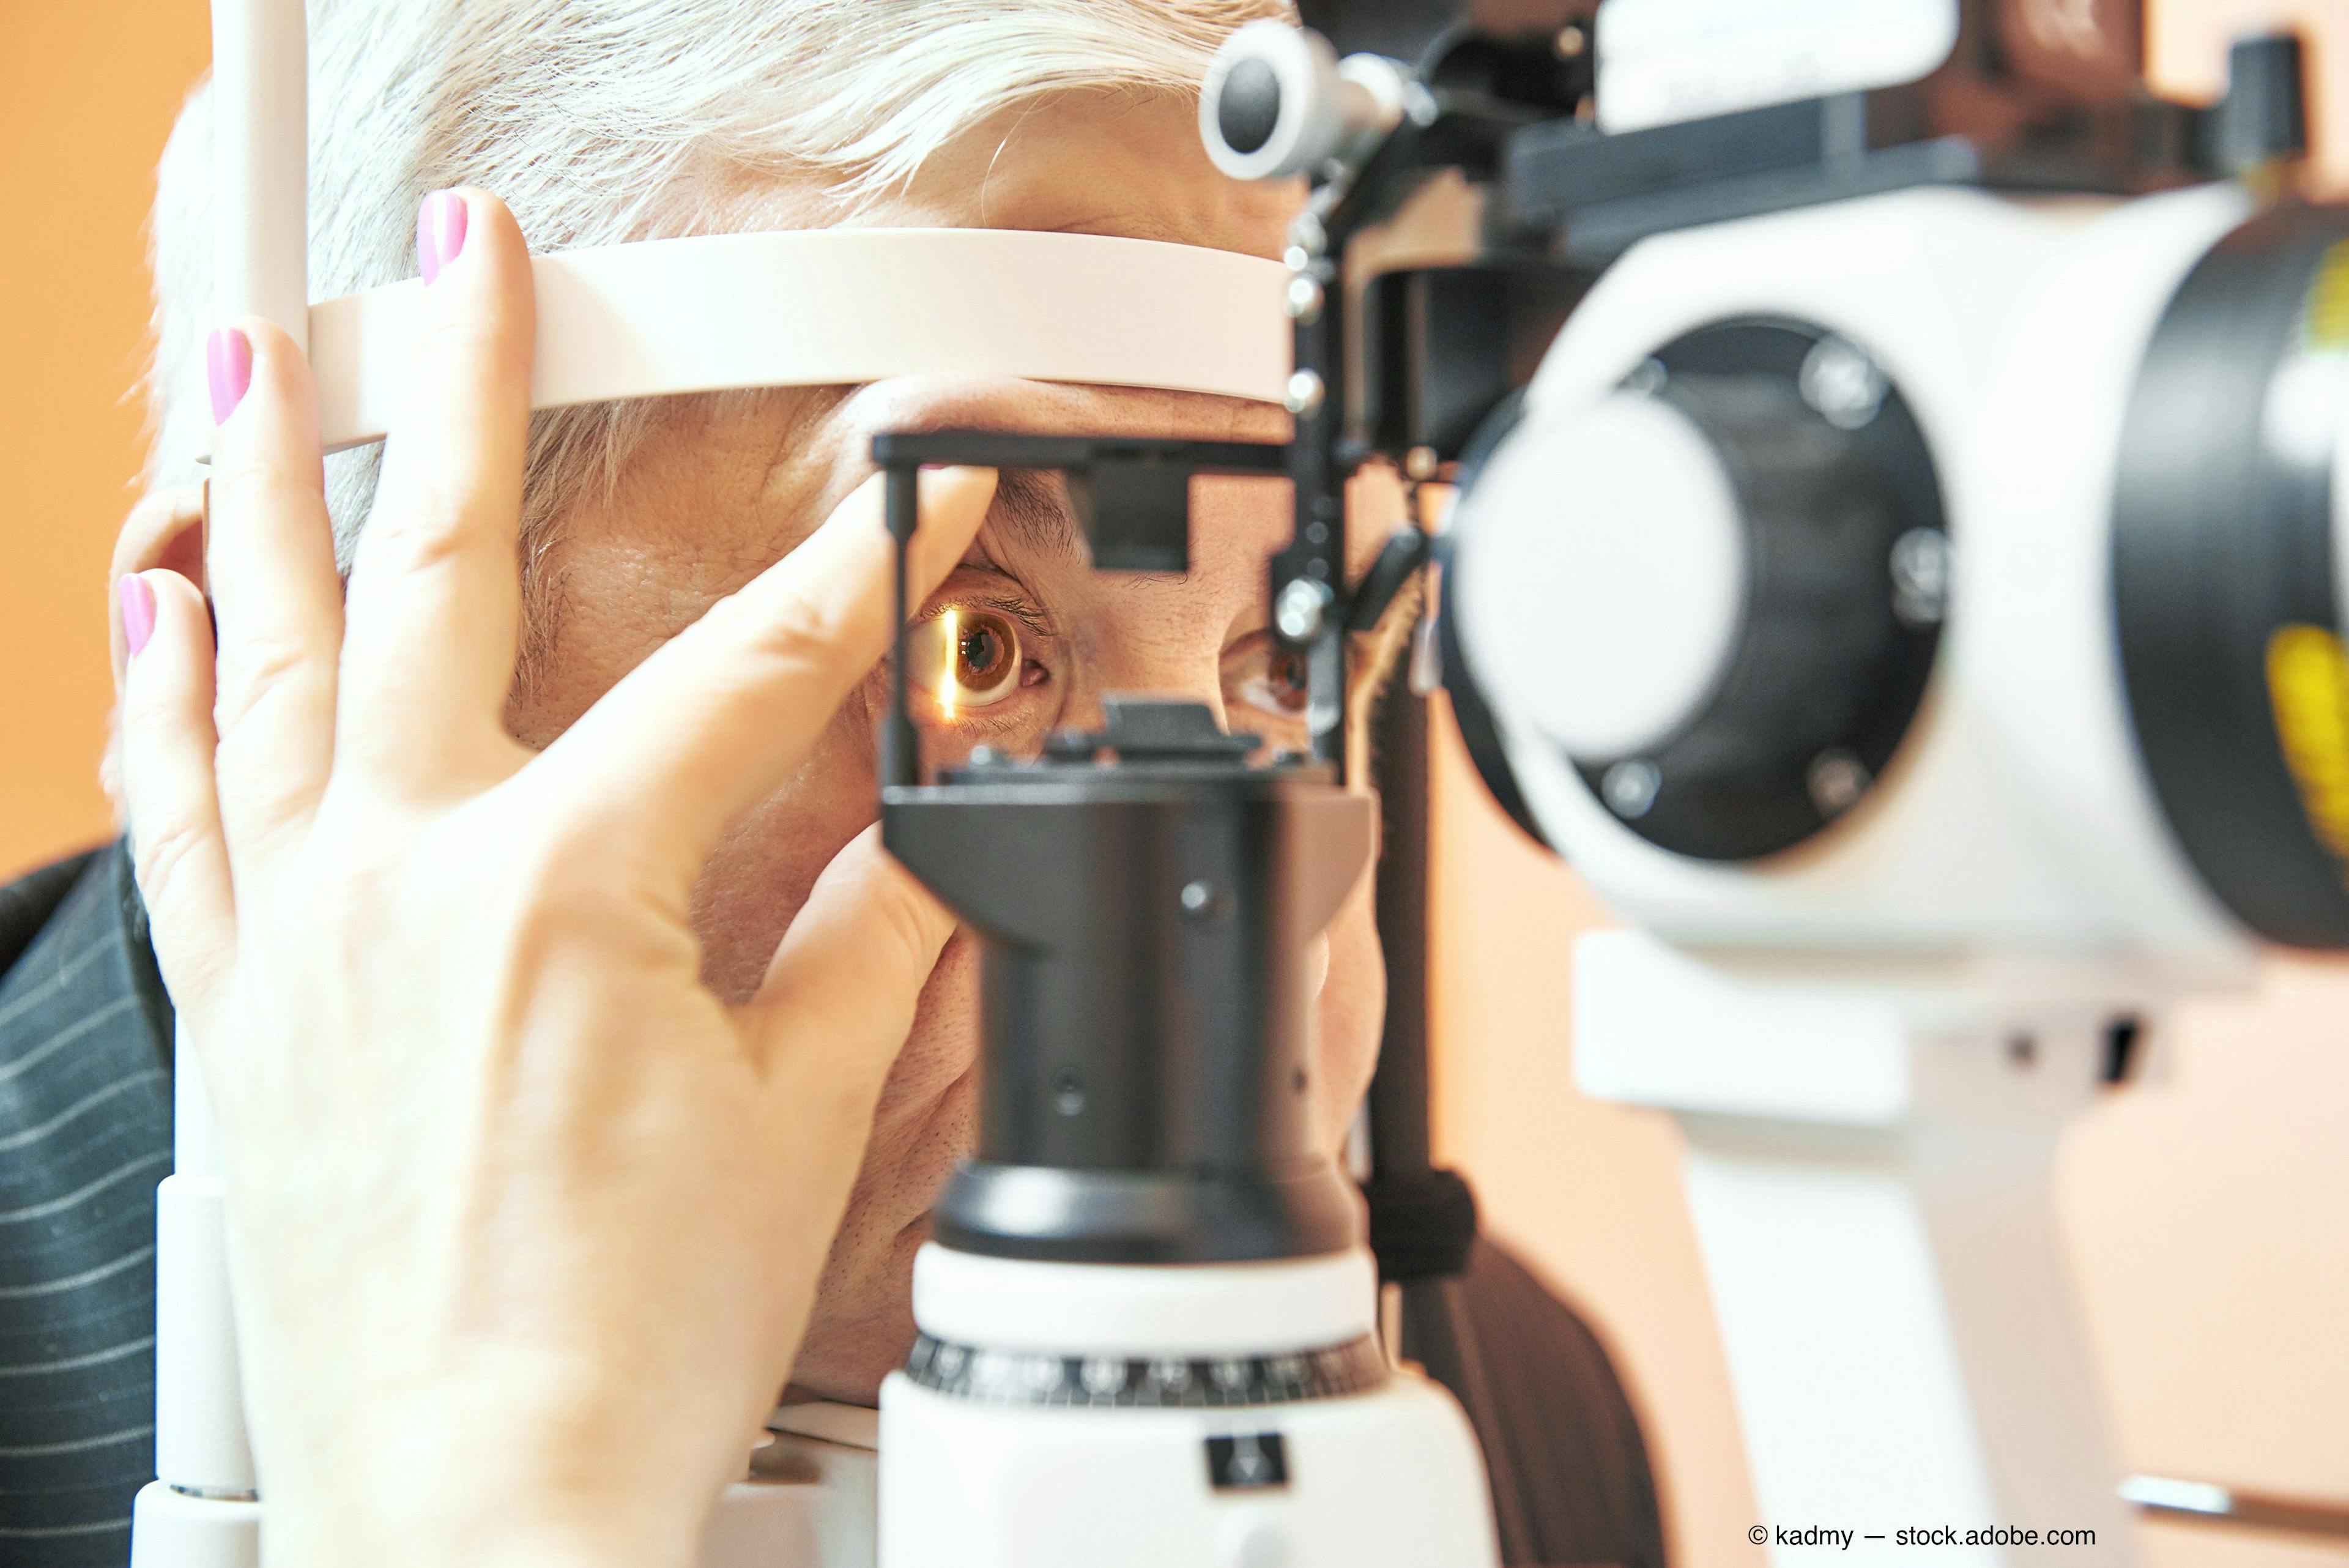  Consider IOP fluctuations when diagnosing glaucoma